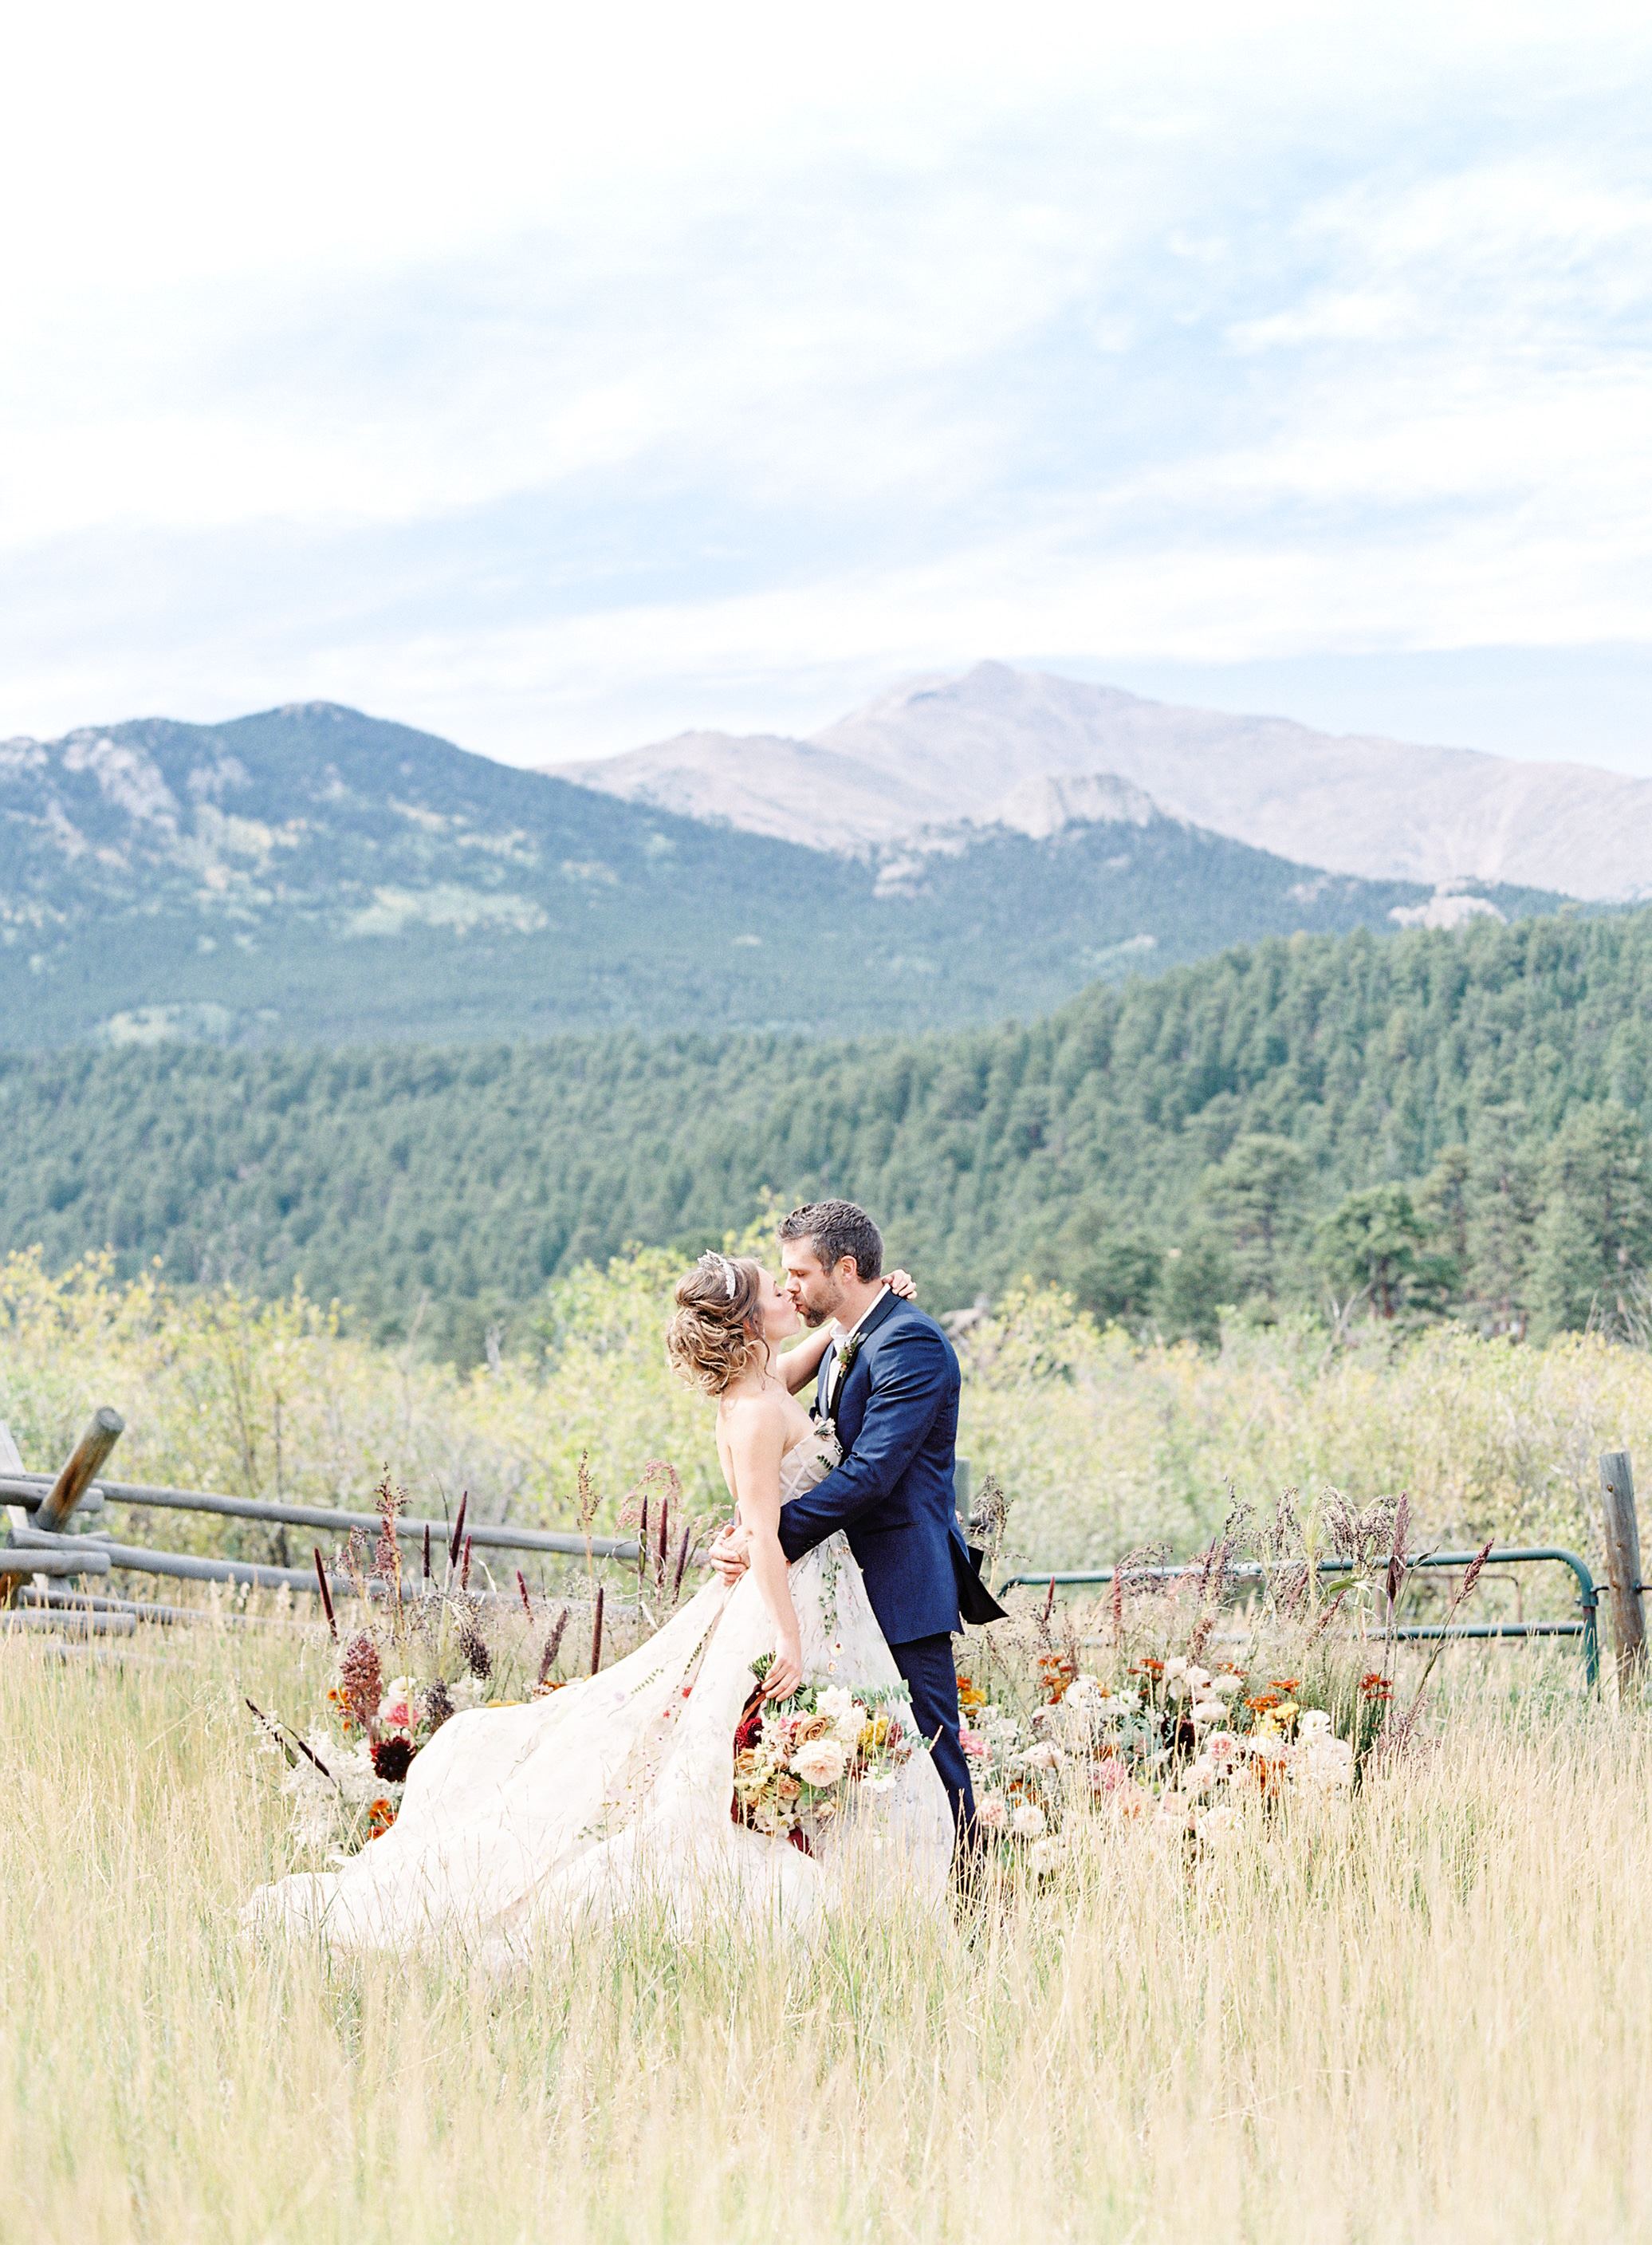 A couple getting married in spring or summer at the Wild Basin Lodge venue in Allespark, Colorado.